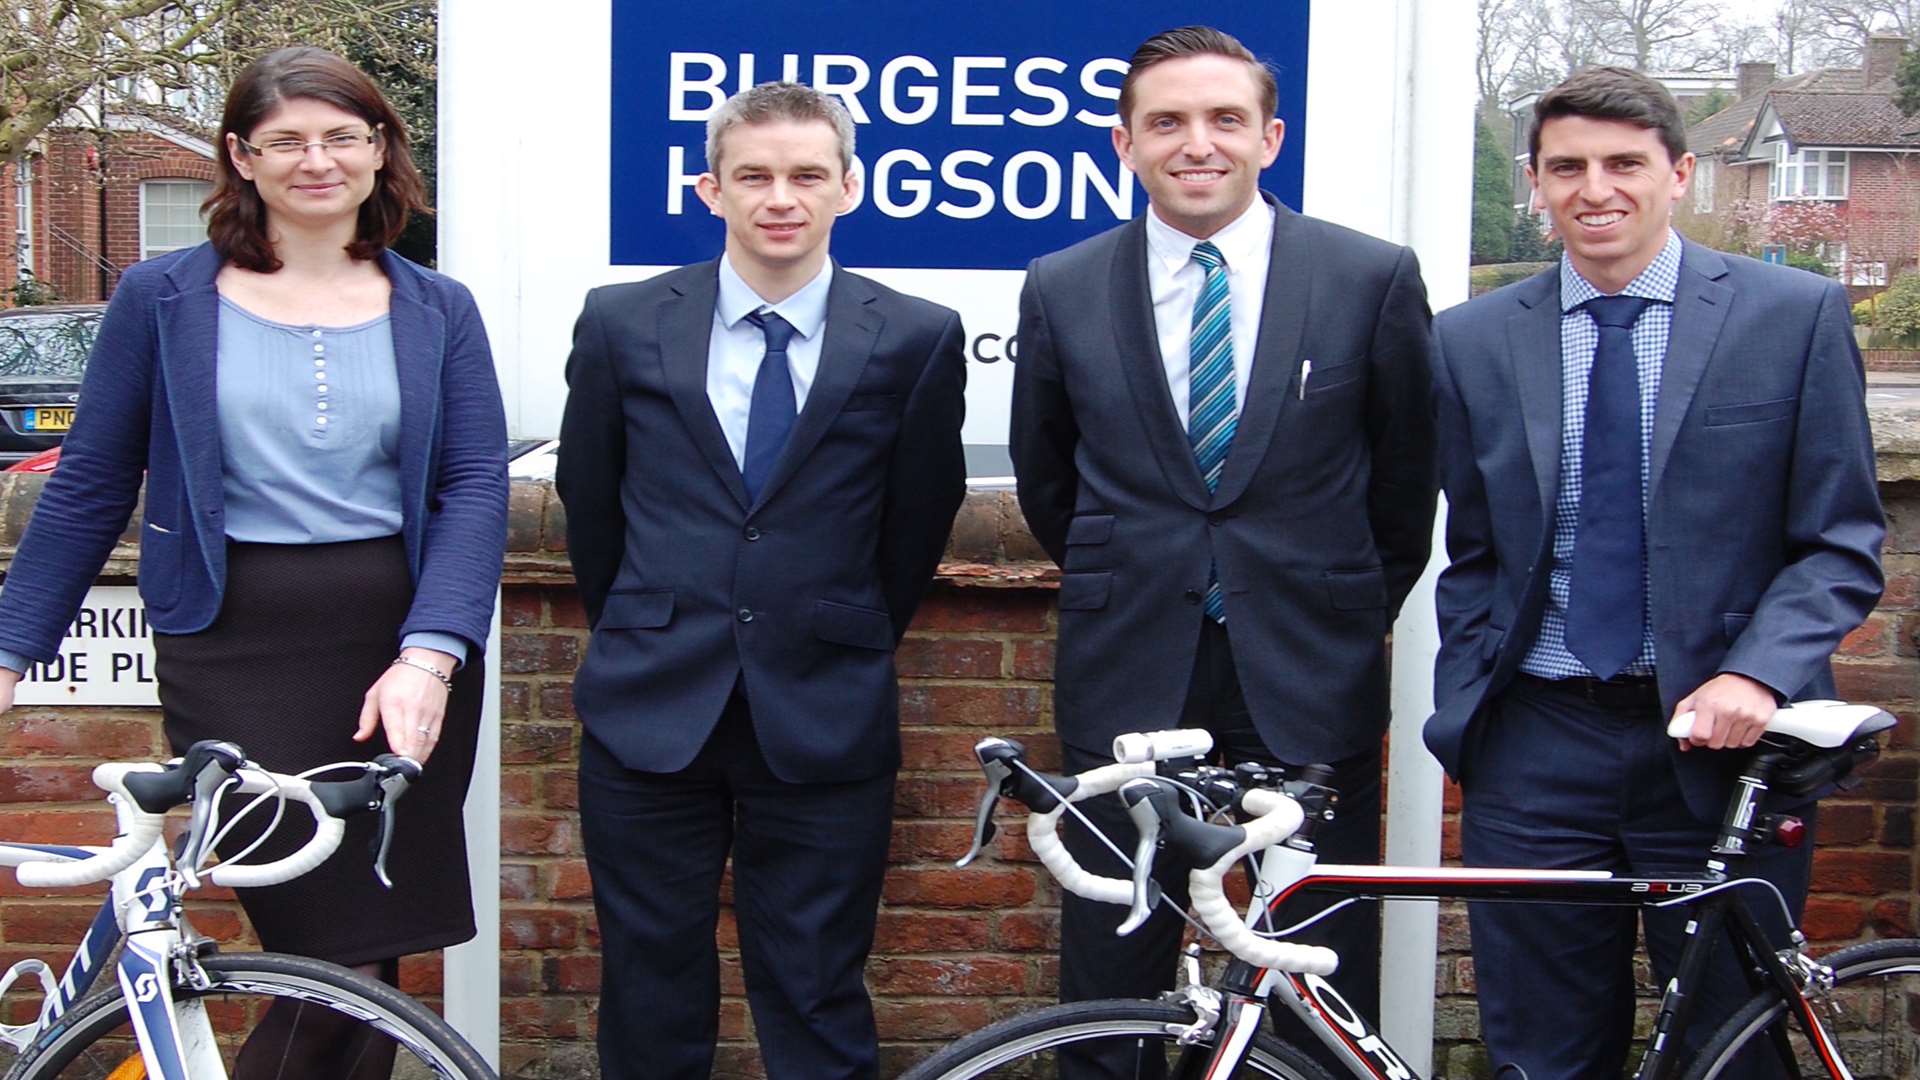 The Burgess Hodgson team taking part in the KM Big Bike Ride on Sunday, April 26 includes Ida Woodger, Tom Saltmer, Matthew Sutton (partner at the firm) and Alex Baker.